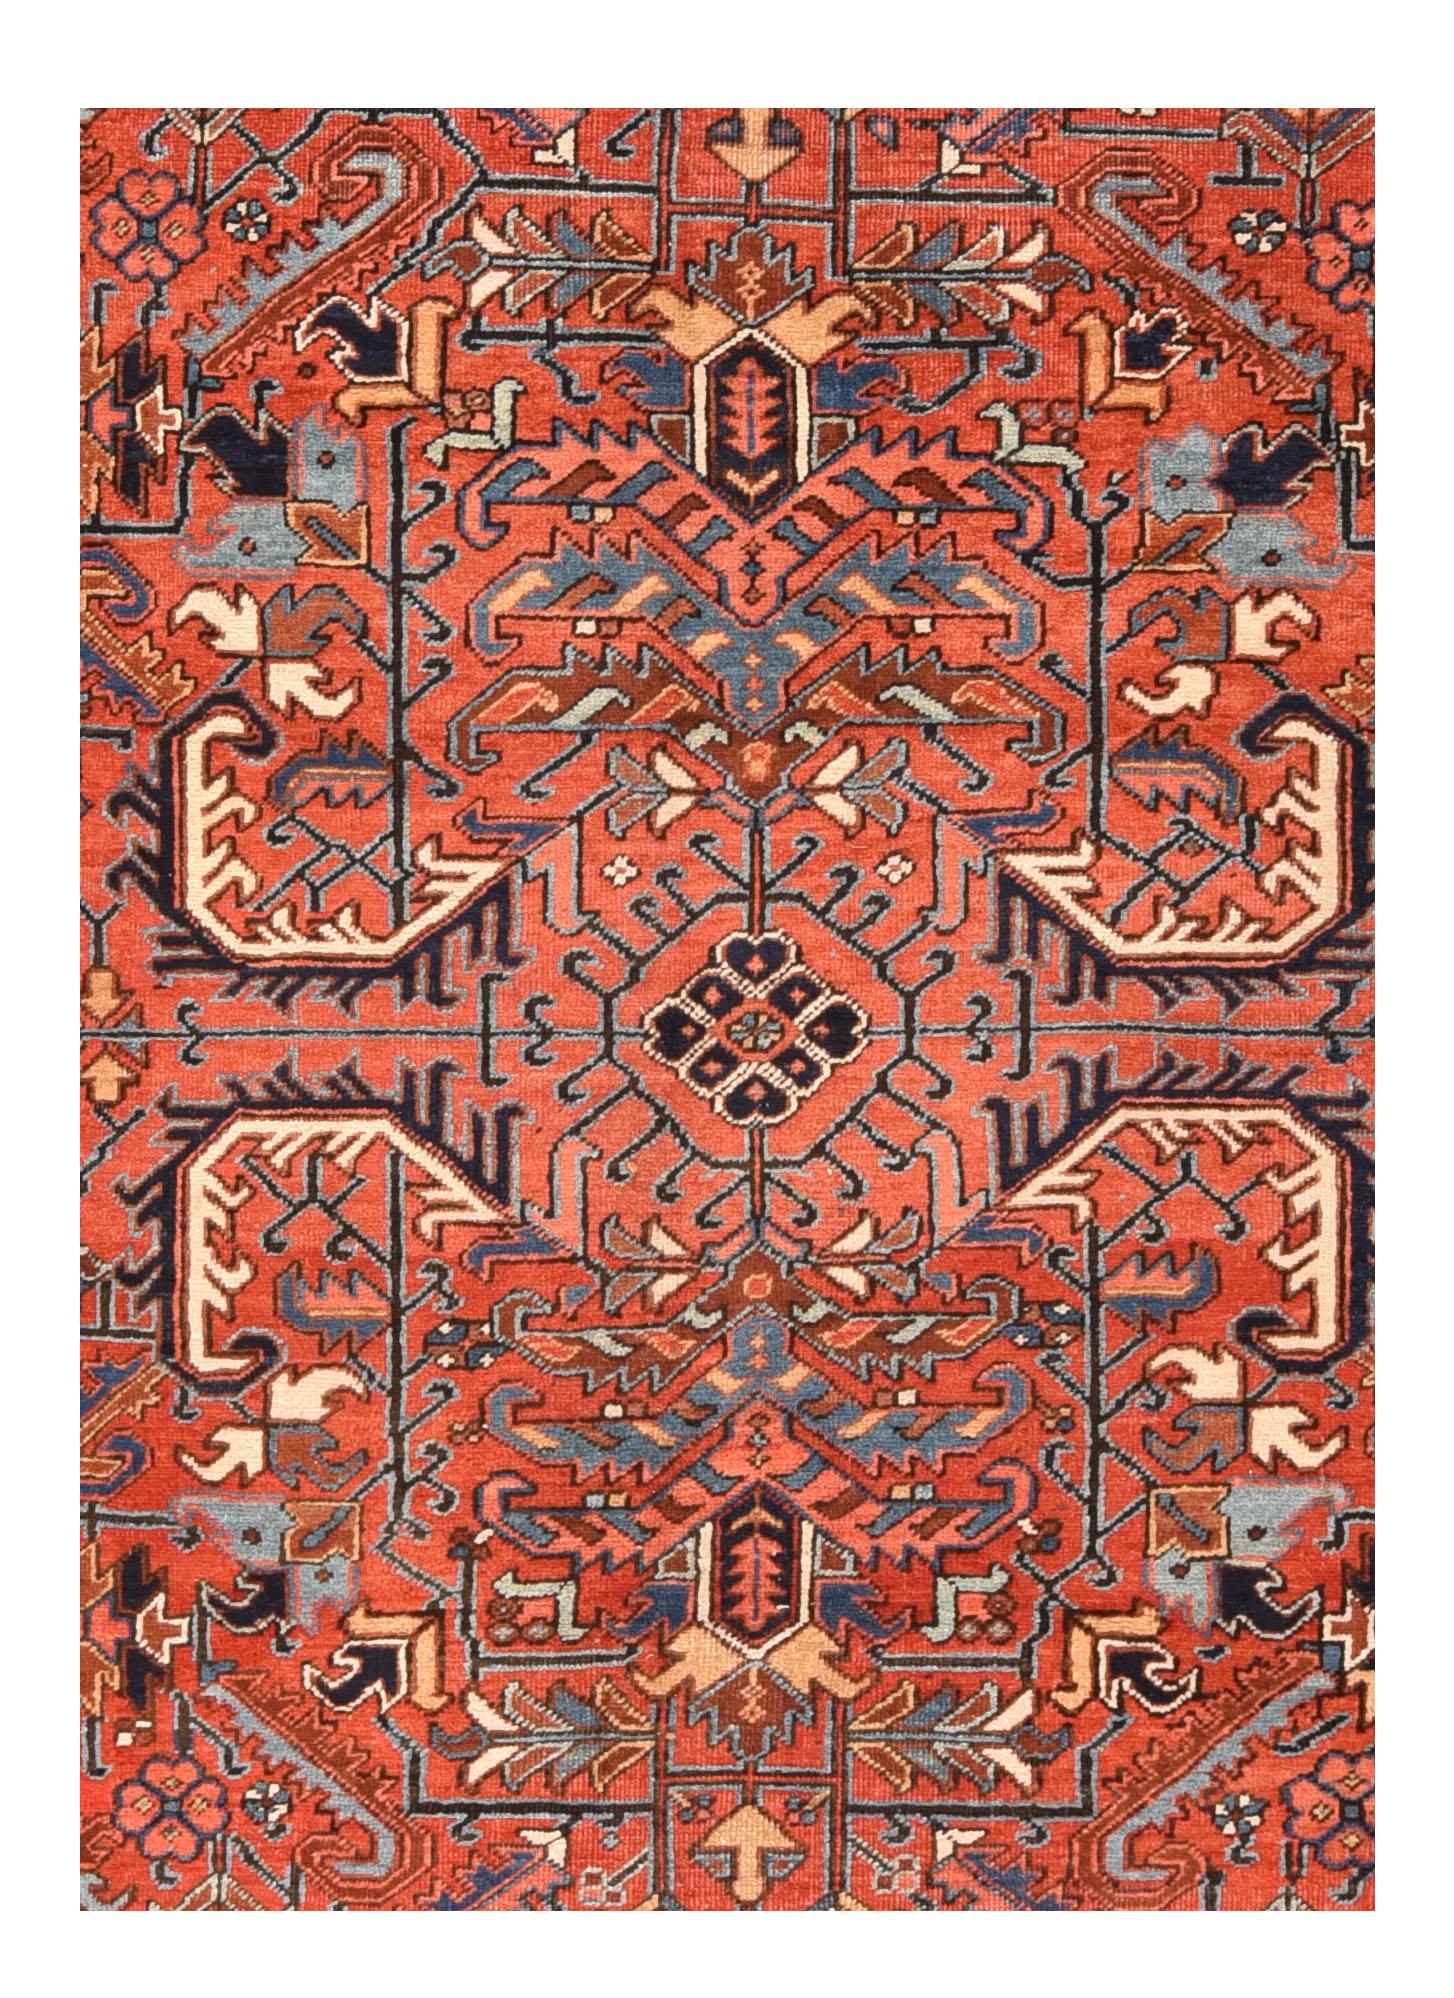 Asian Vintage Persian Heriz Area Rug, Hand Knotted, circa 1900